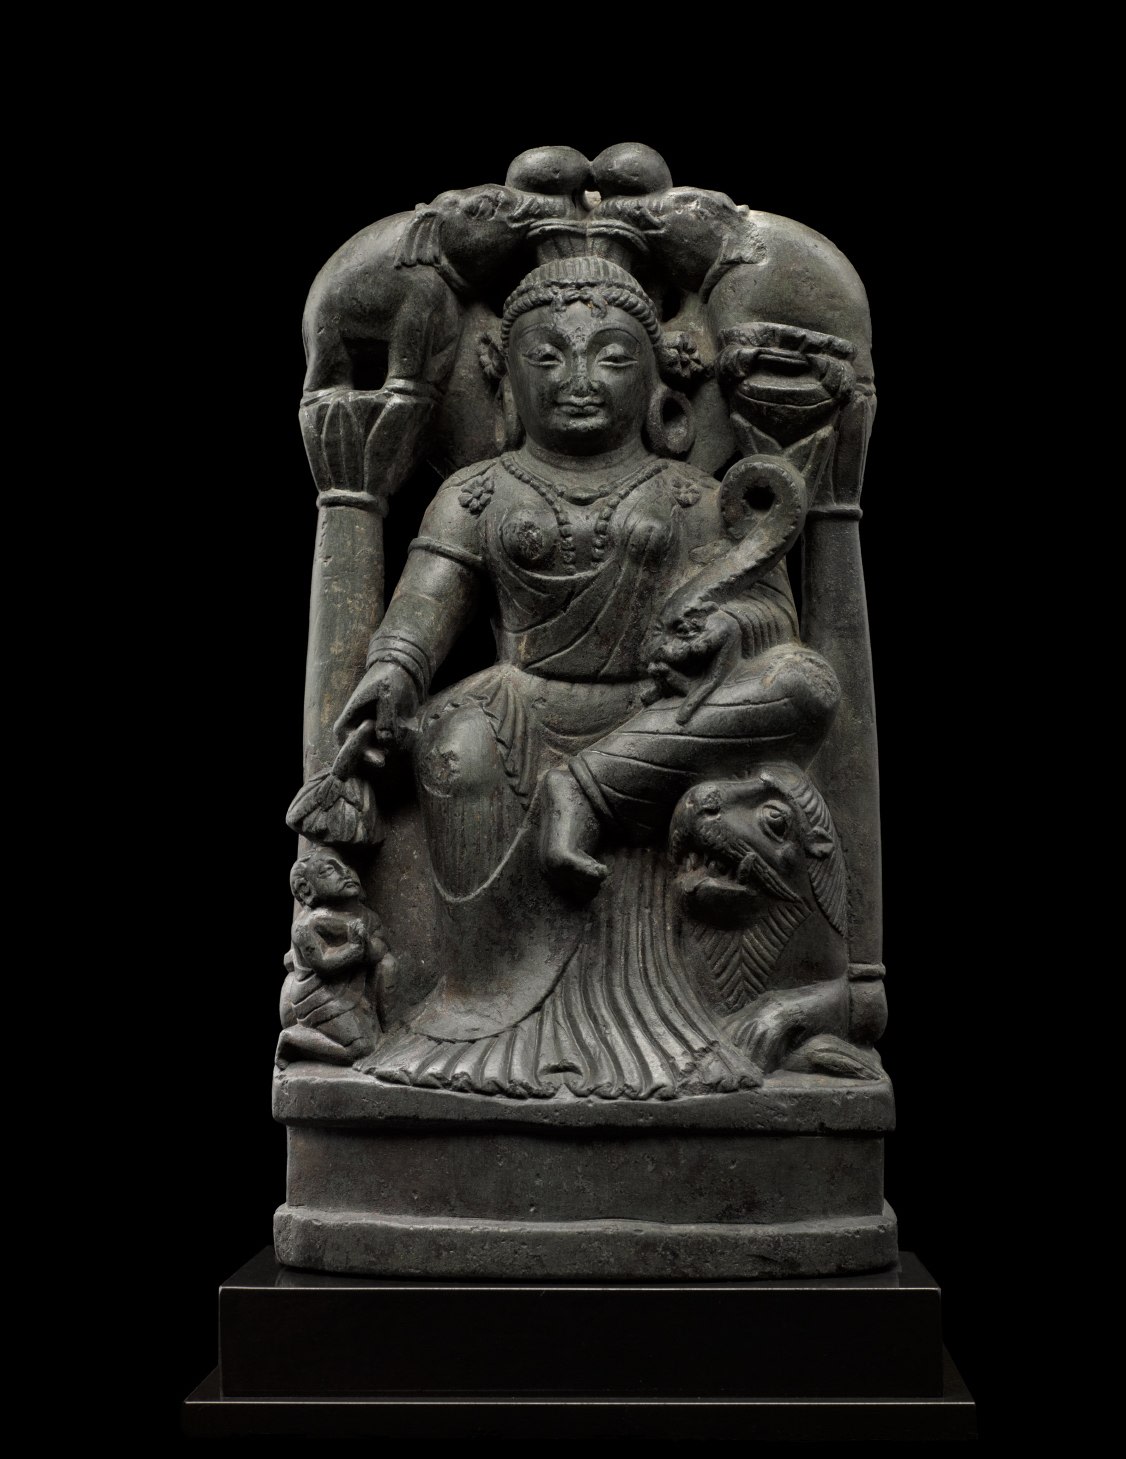 Large photo of Sculpture of Gaja Lakshmi, the Goddess of Fortune, who is venerated as a bringer of good fortune and well-being to the earth, of which she was an early personification.  She wears a long transparent chiton with delicate pleats pooling on the base, beaded jewelry, large hoop earrings, and stylized mural crown. 